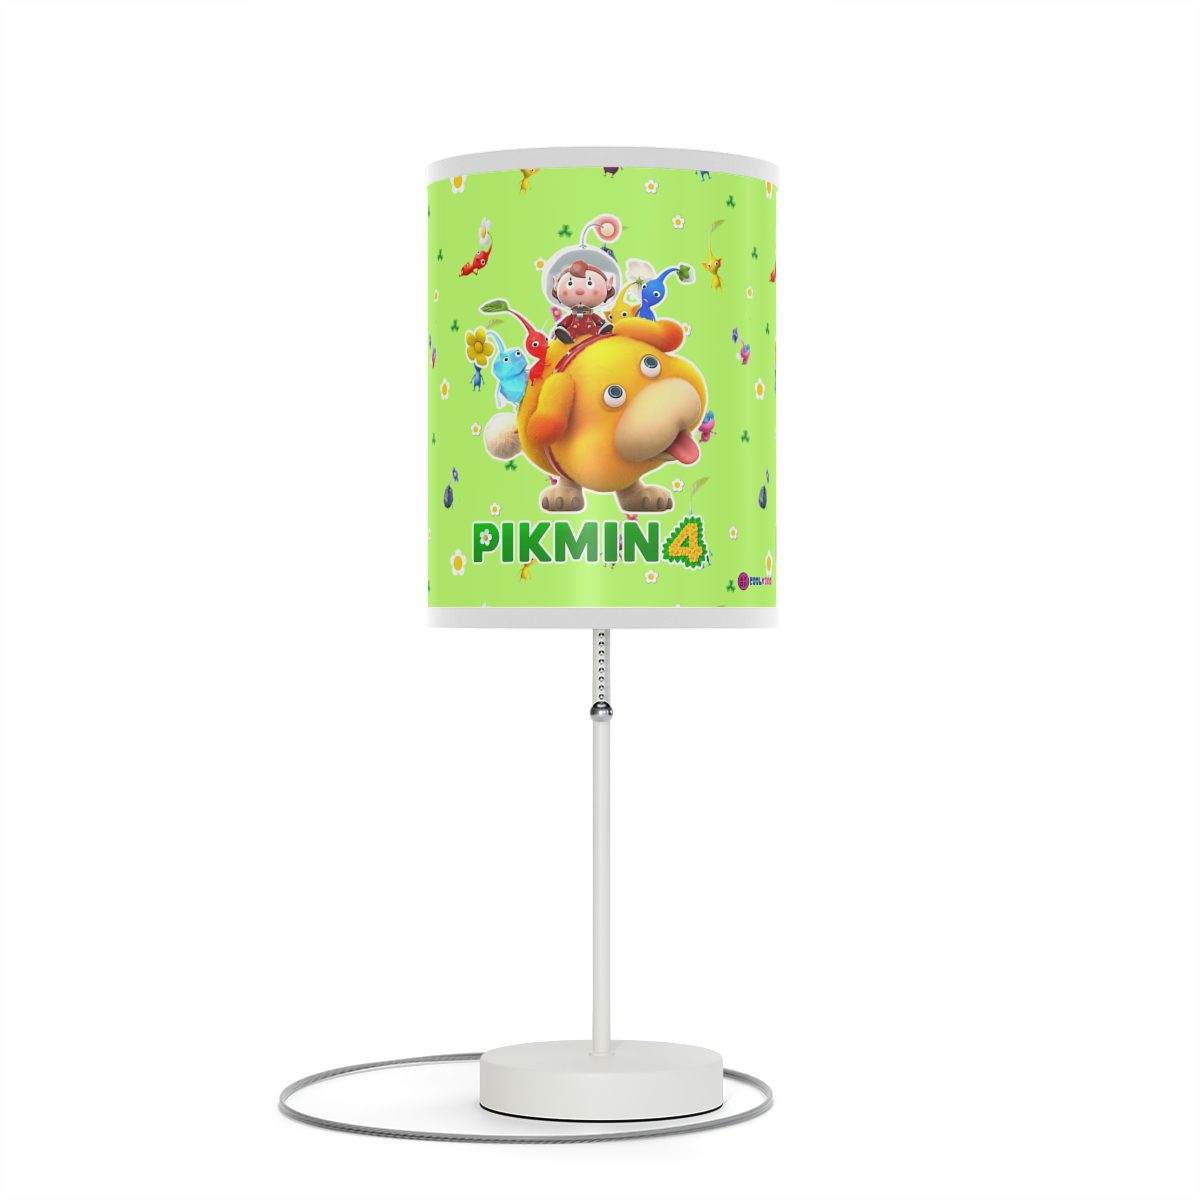 Pikmin 4 videogame Green Lamp on a Stand Cool Kiddo 10